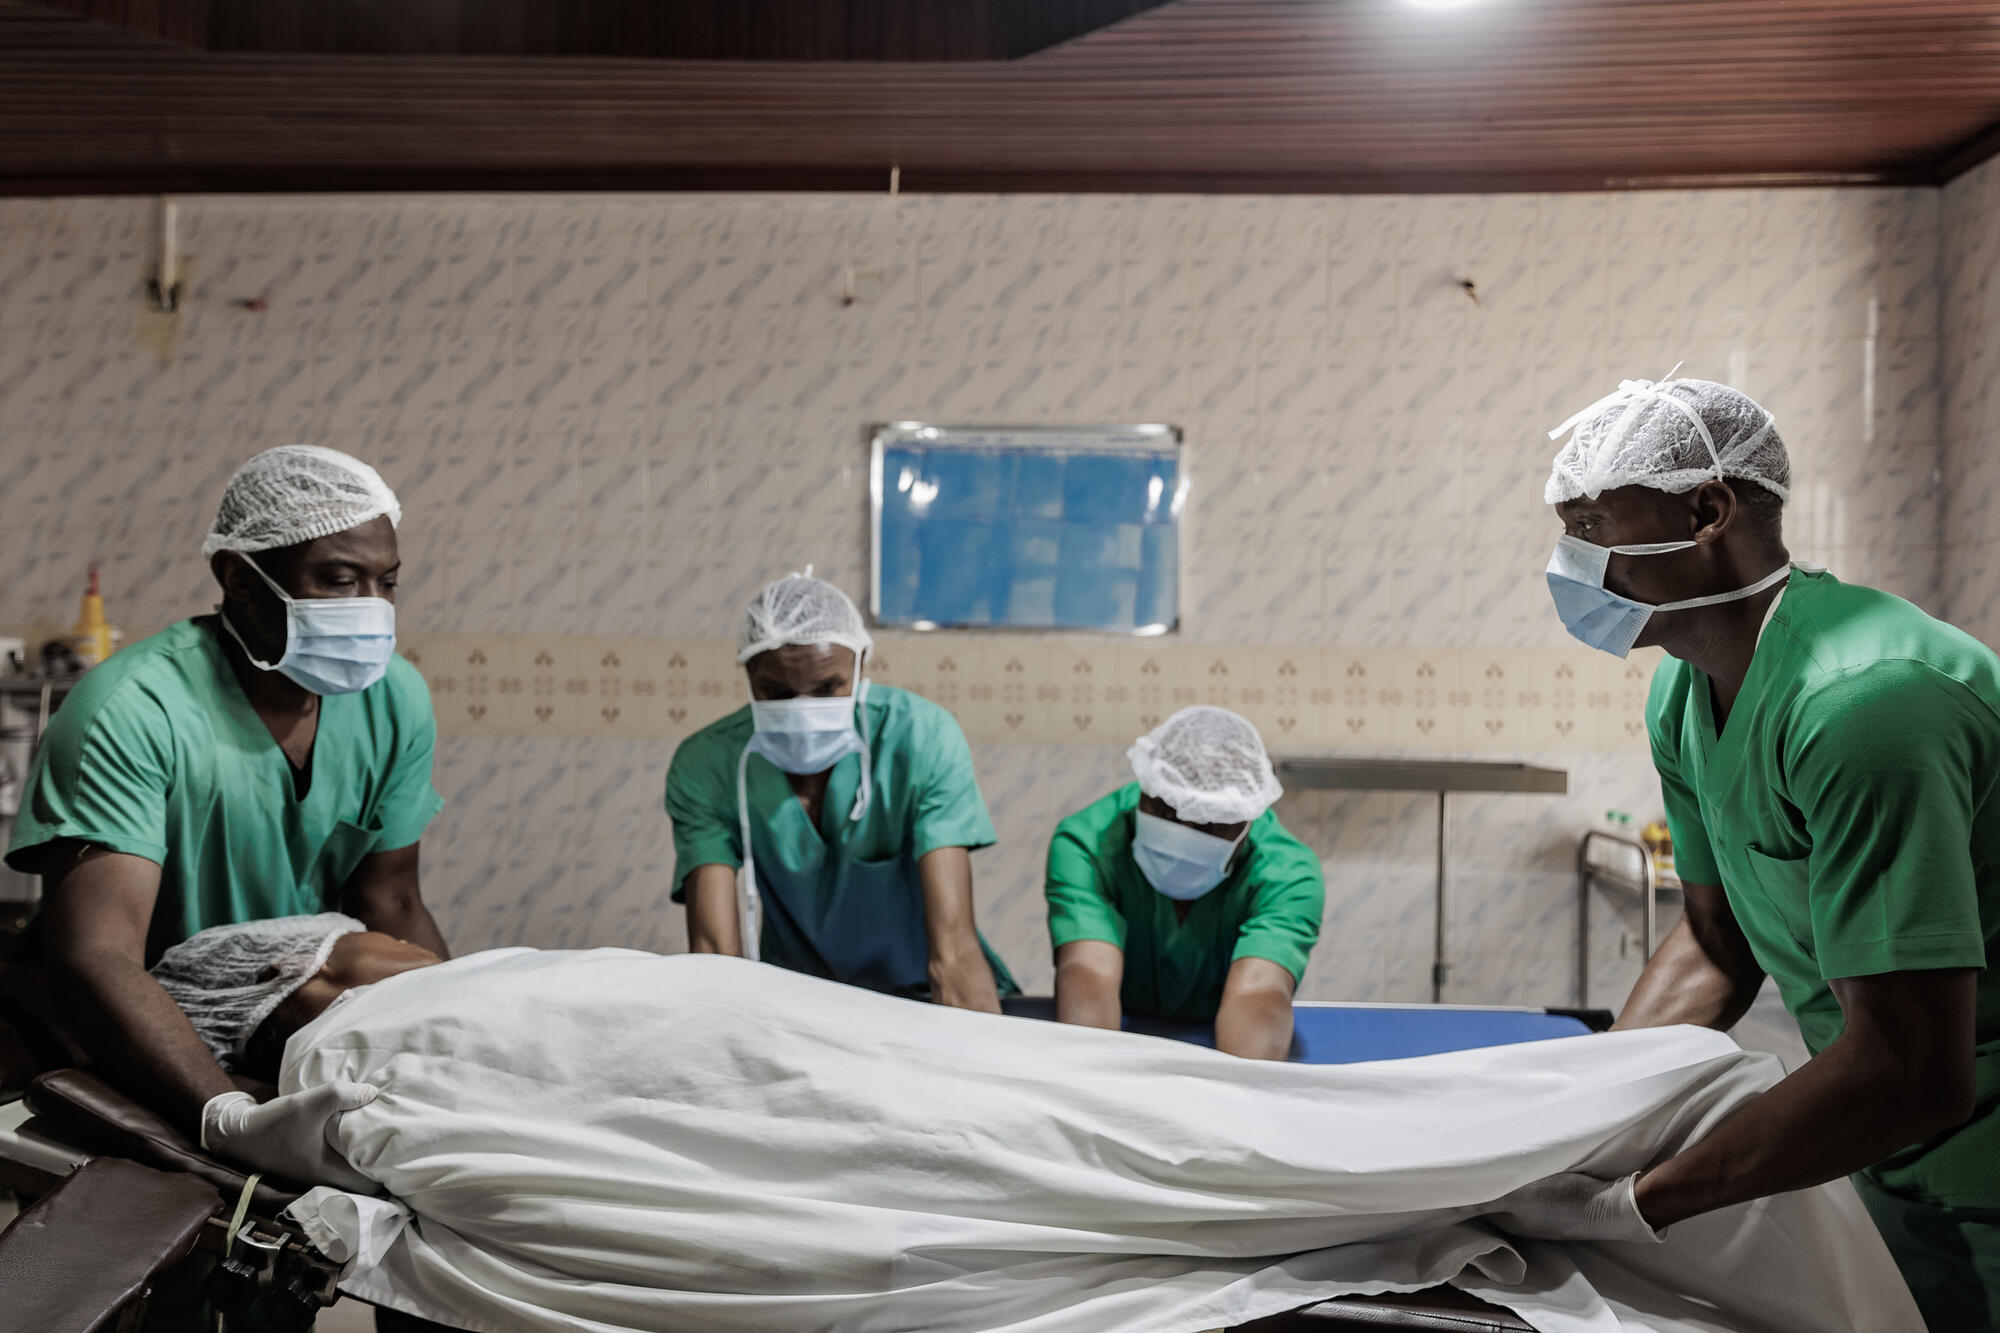 Surgical care addresses needs amid resurgent violence in DRC